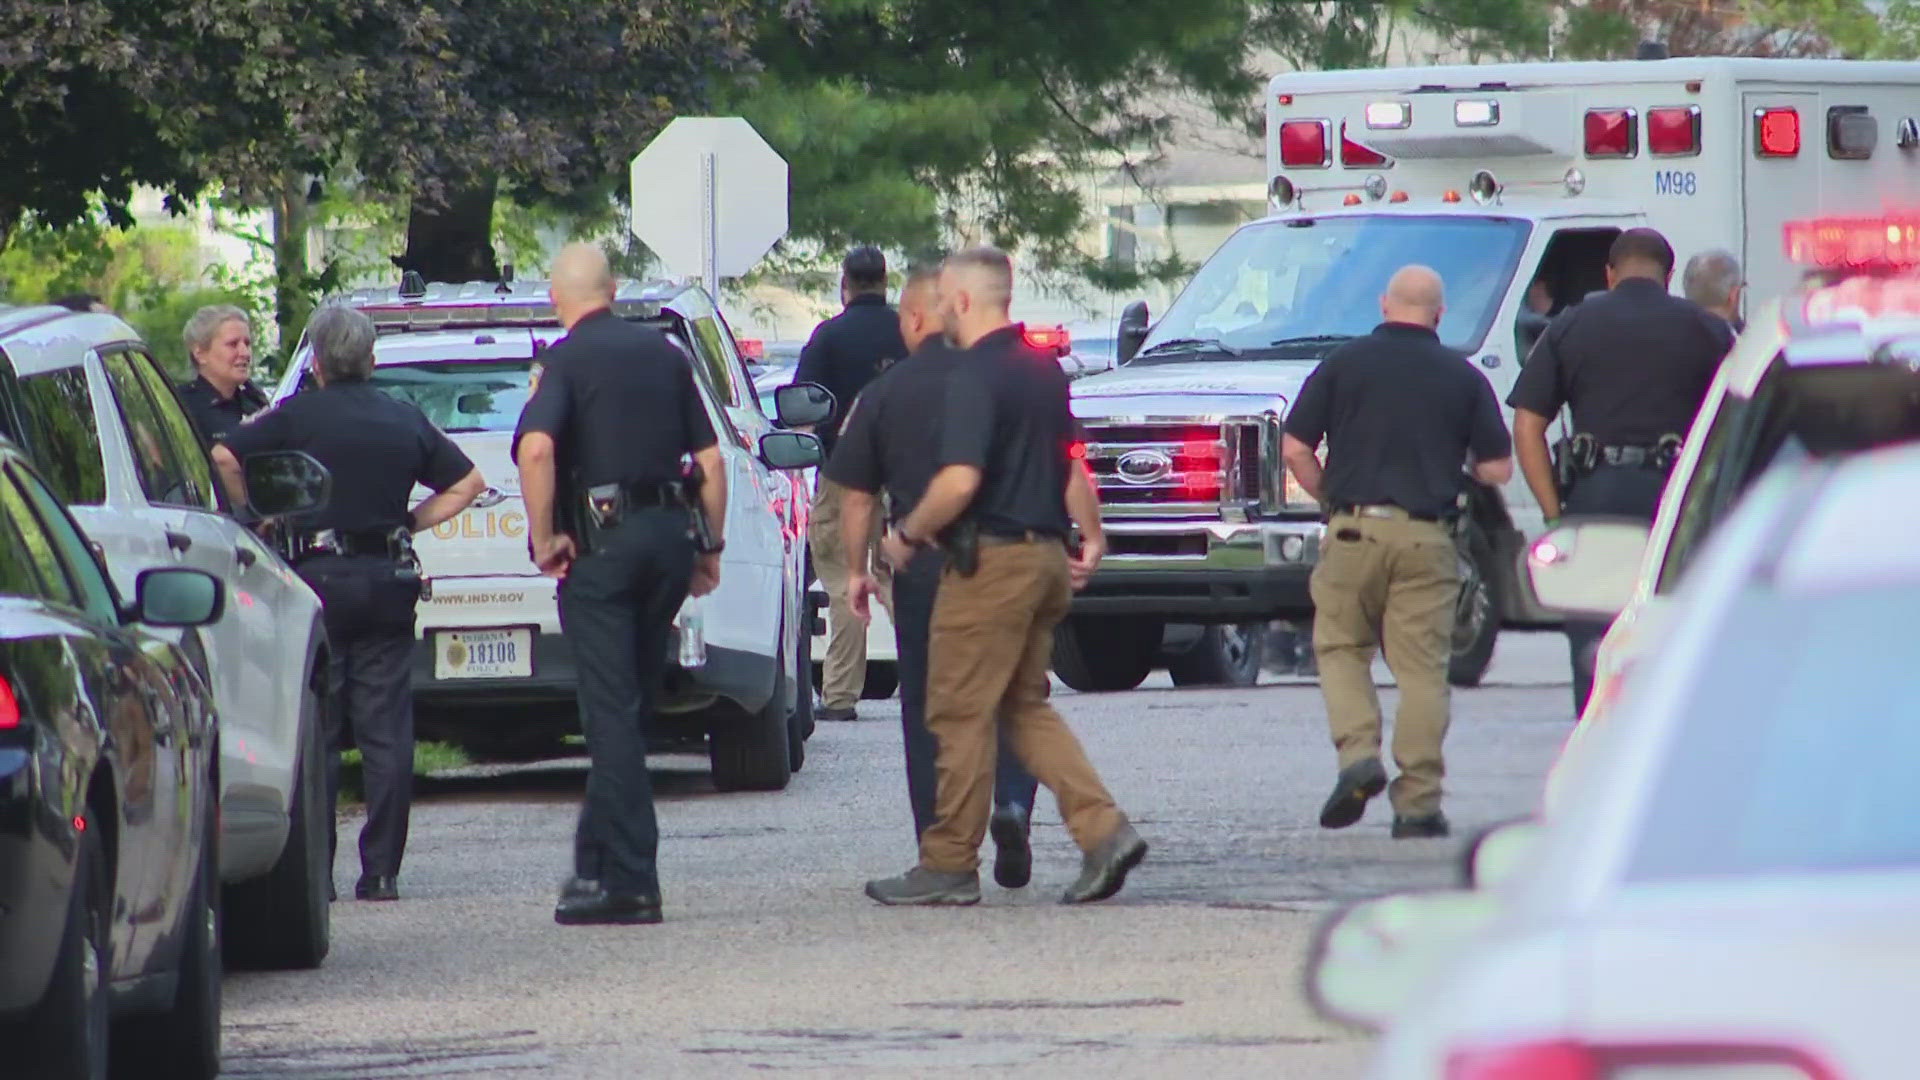 Police said the suspect had fired a gunshot at an officer Thursday afternoon.